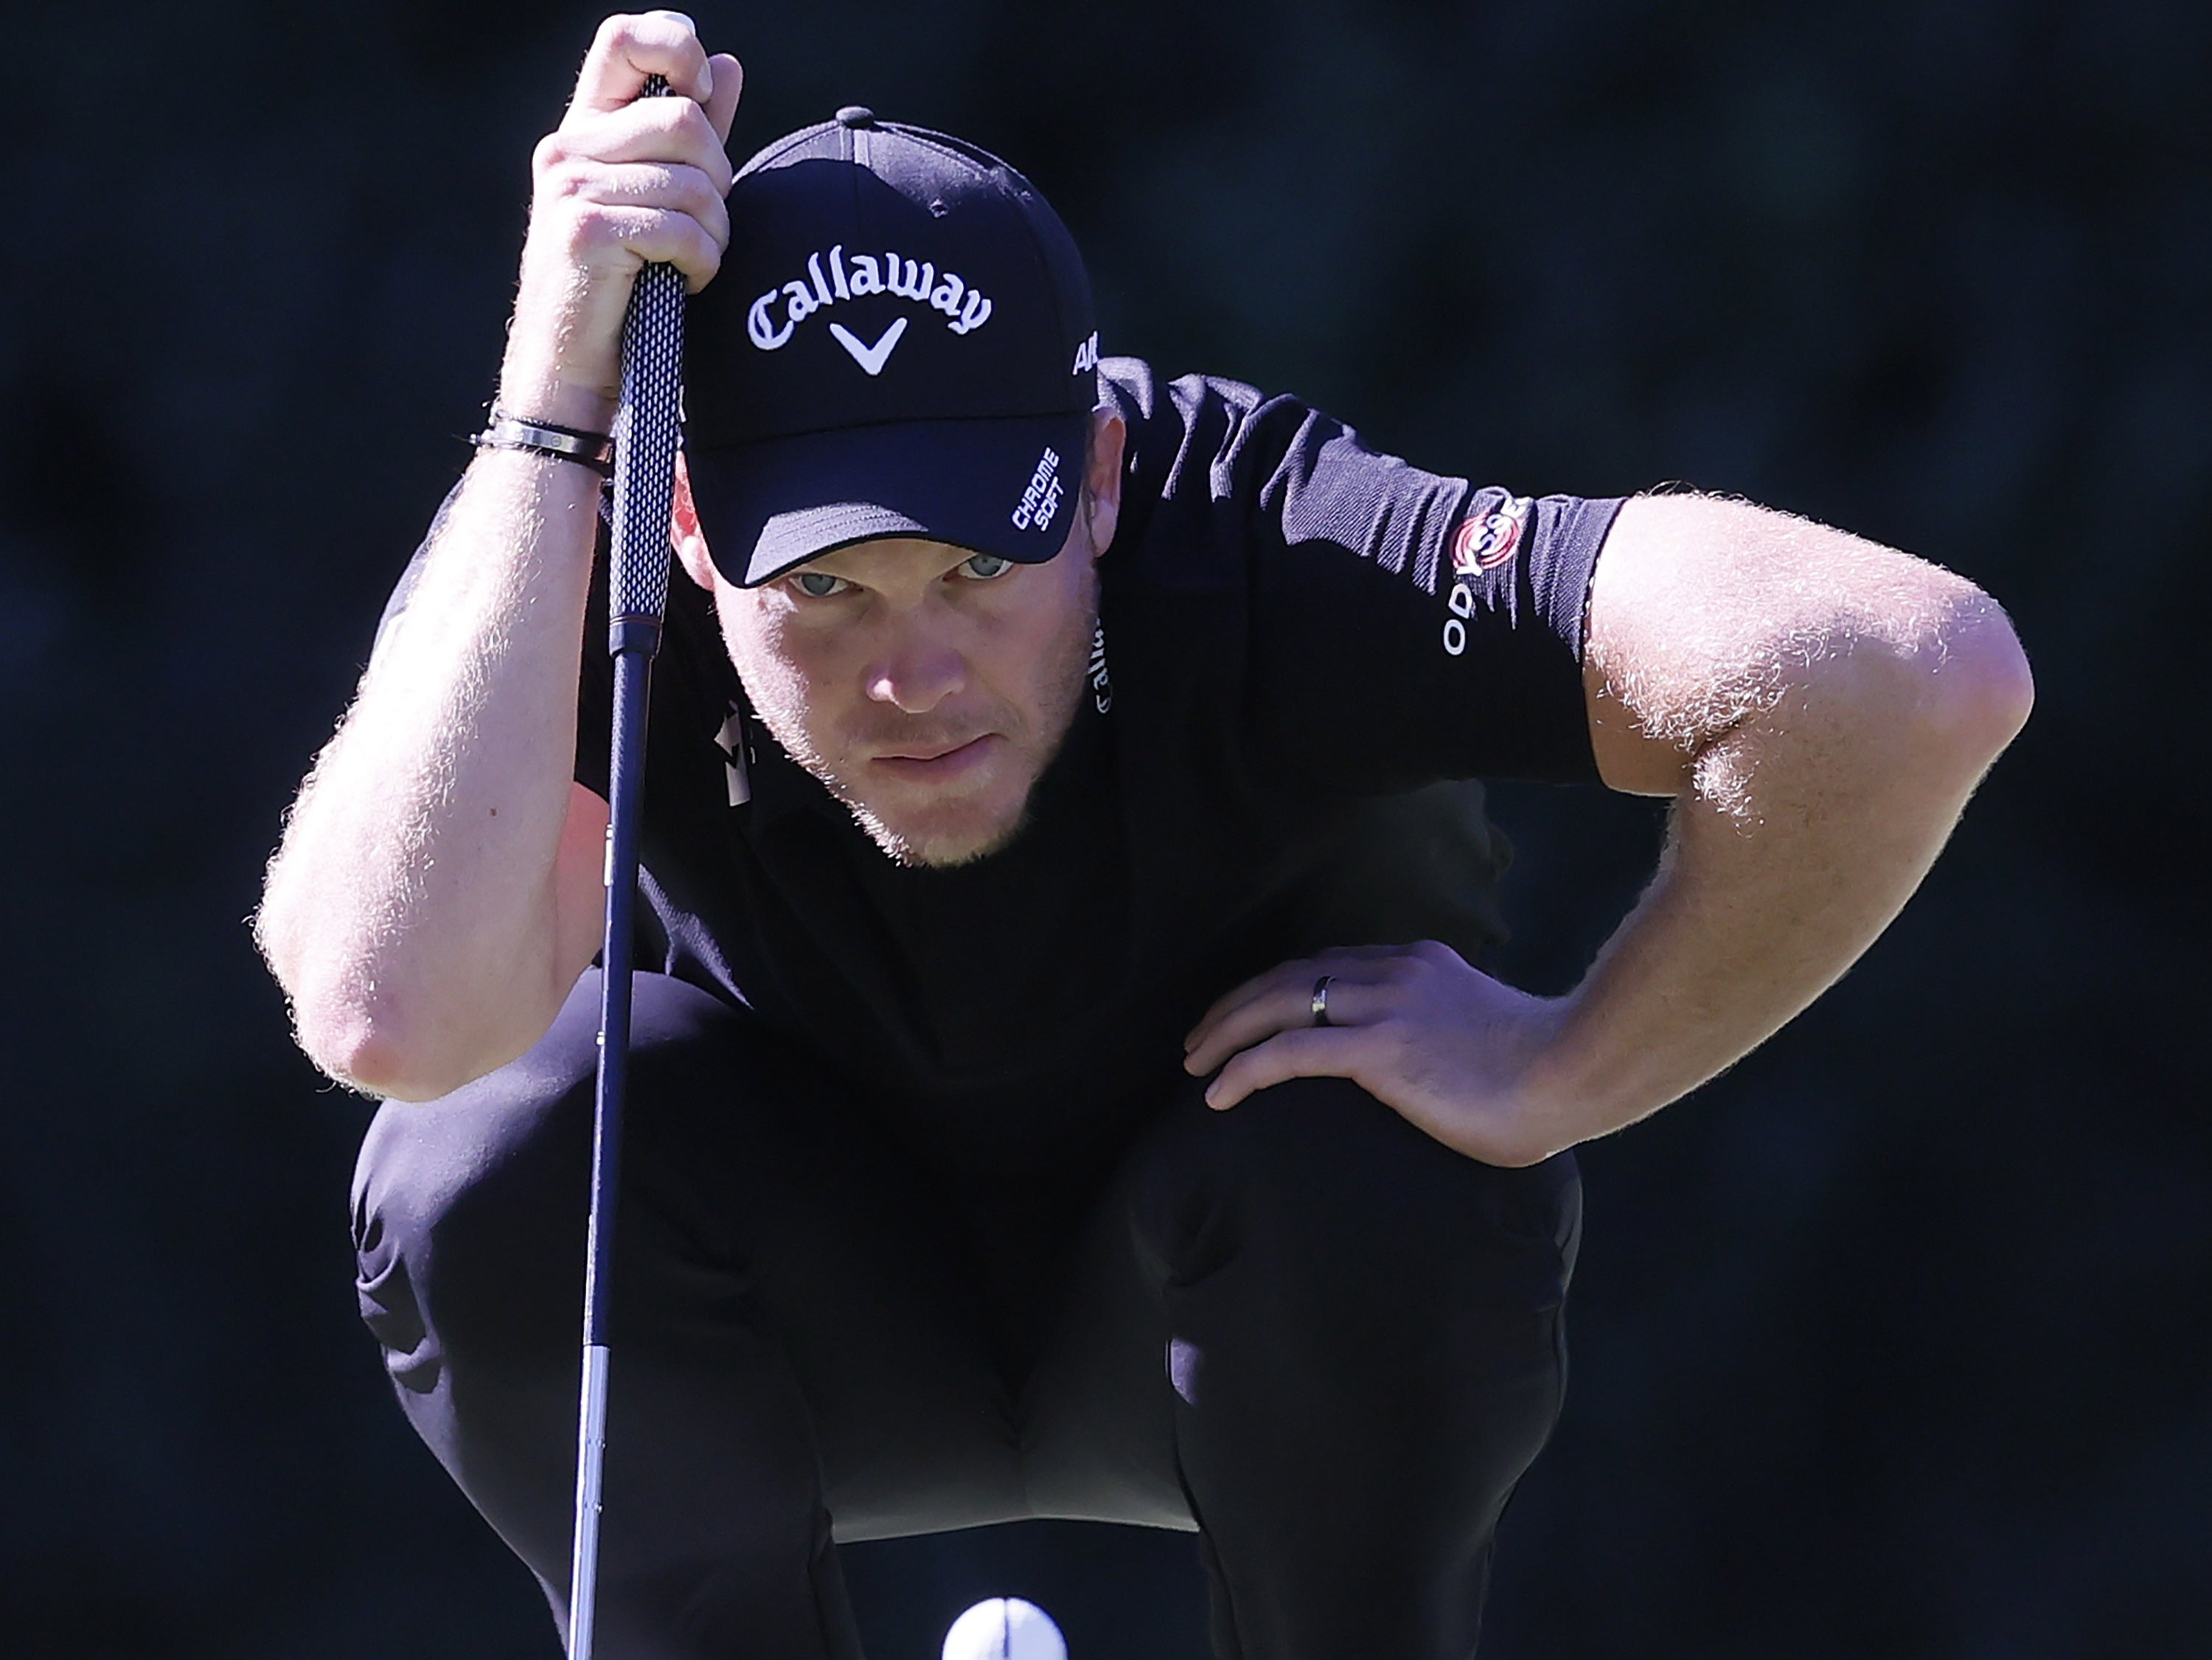 Danny Willett is two shots off the lead four years after winning hi first Masters title